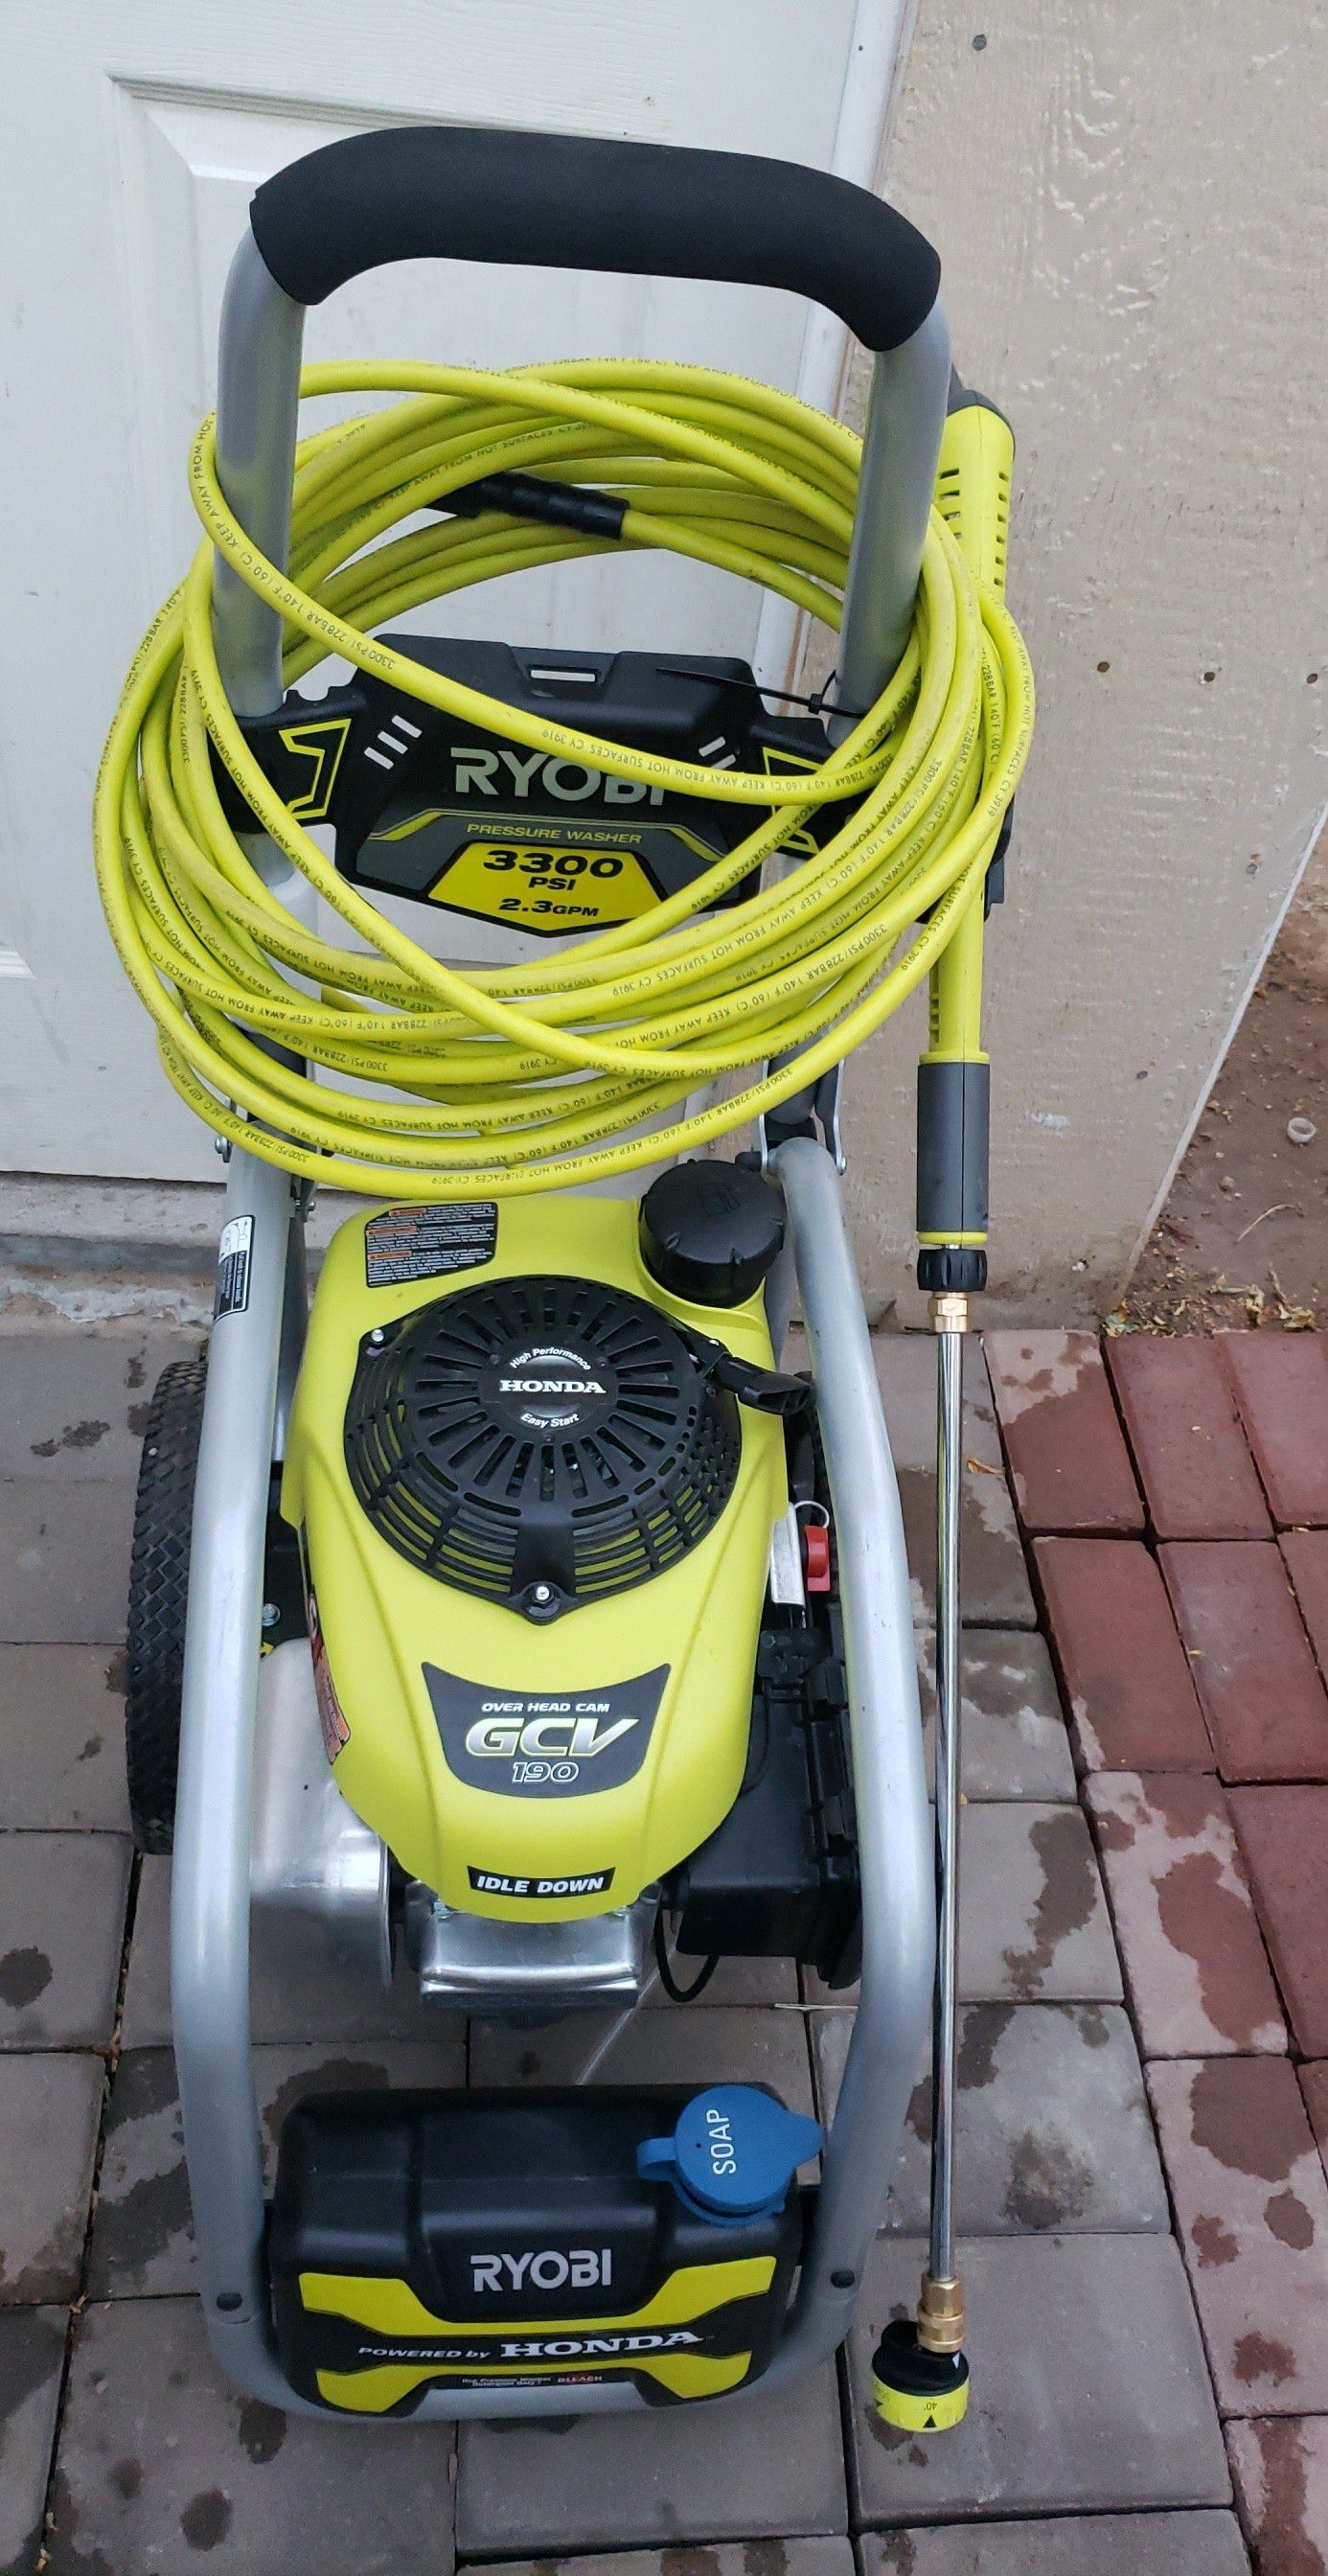 RYOBI 3300 PSI 2.3 GPM Cold Water Gas Pressure Washer with Honda GCV190 Idle Down